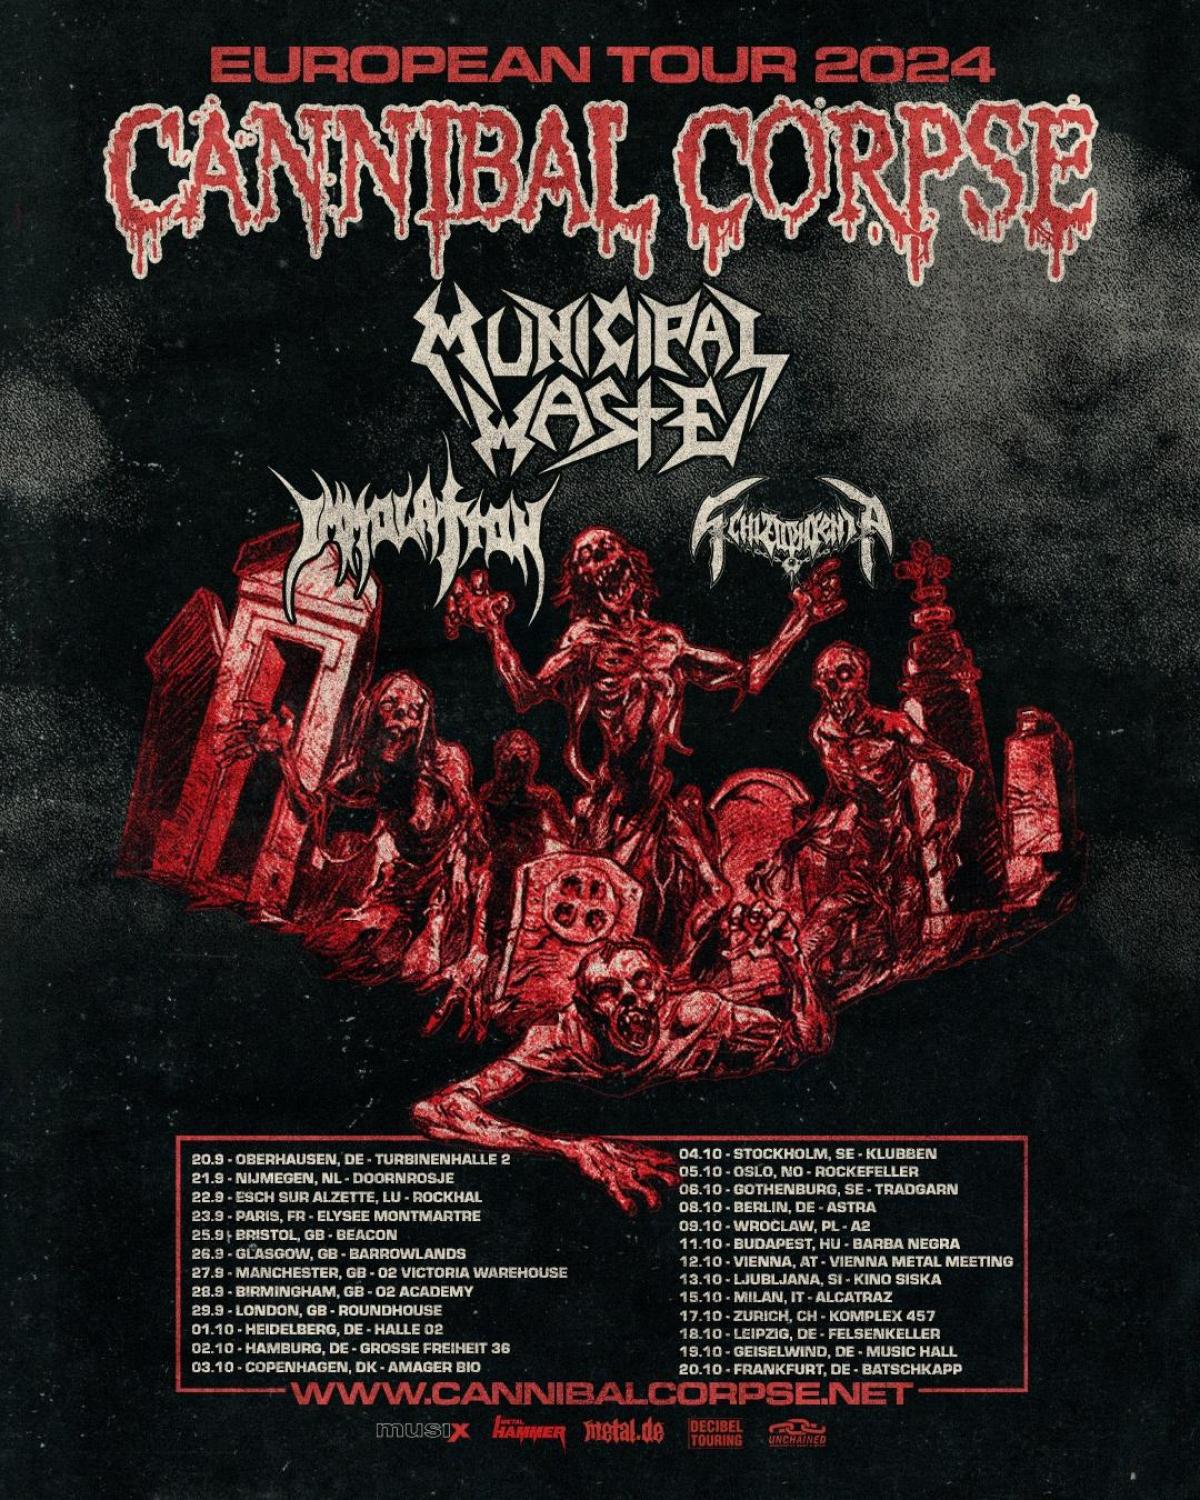 Cannibal Corpse - Municipal Waste - Immolation - Schizophrenia at Elysee Montmartre Tickets